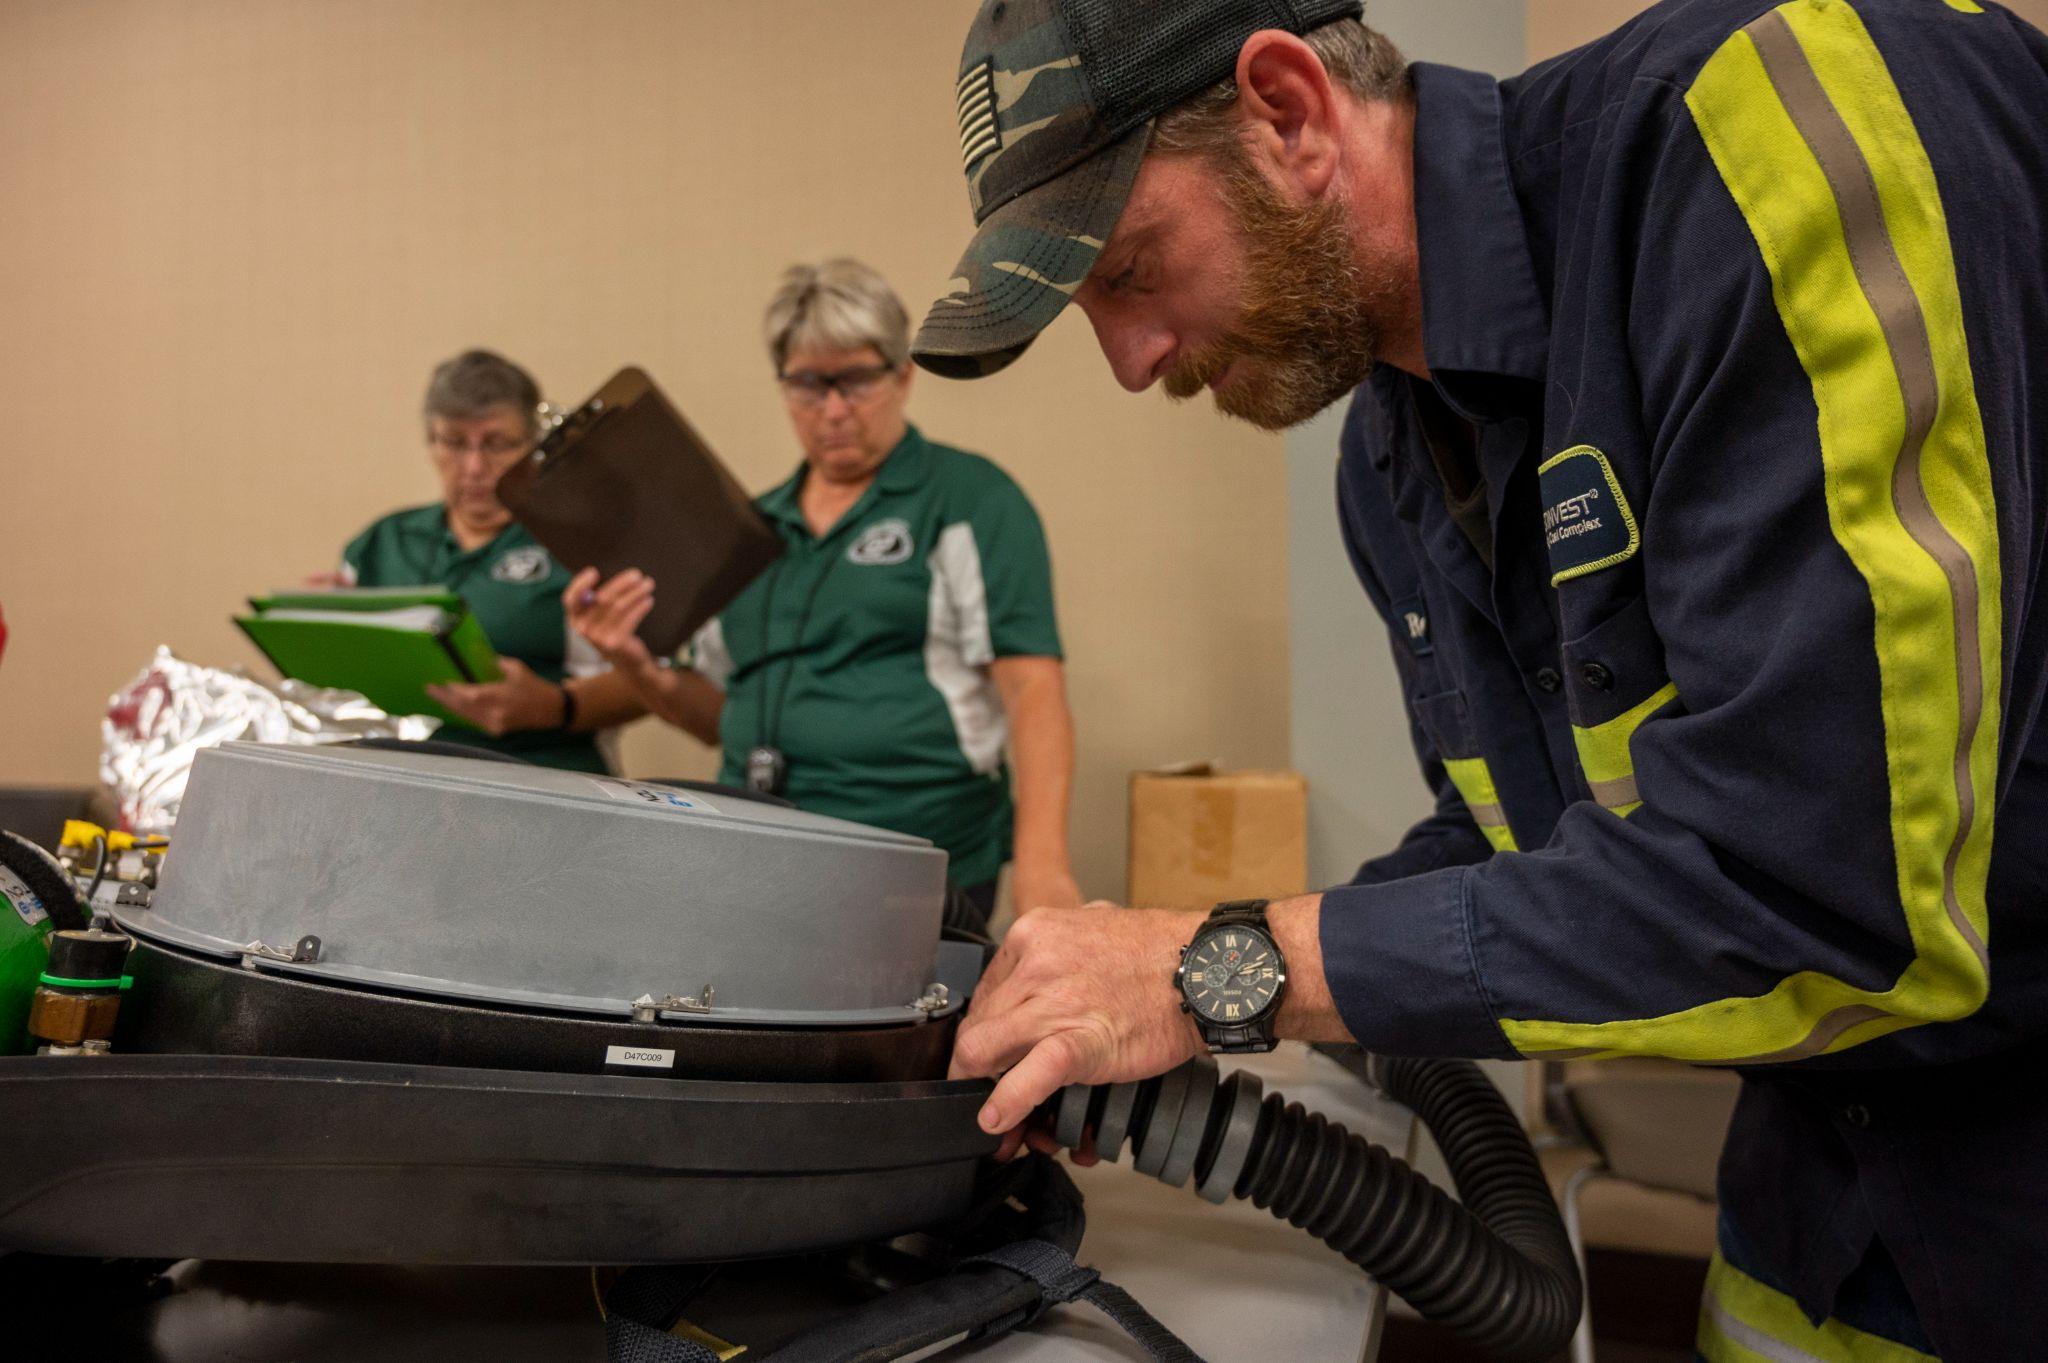 10 Skill Drills and Trainings Included in the 2022 Fallen Heroes Mine Emergency Response Drill Exercise at the West Virginia Training and Conference Center